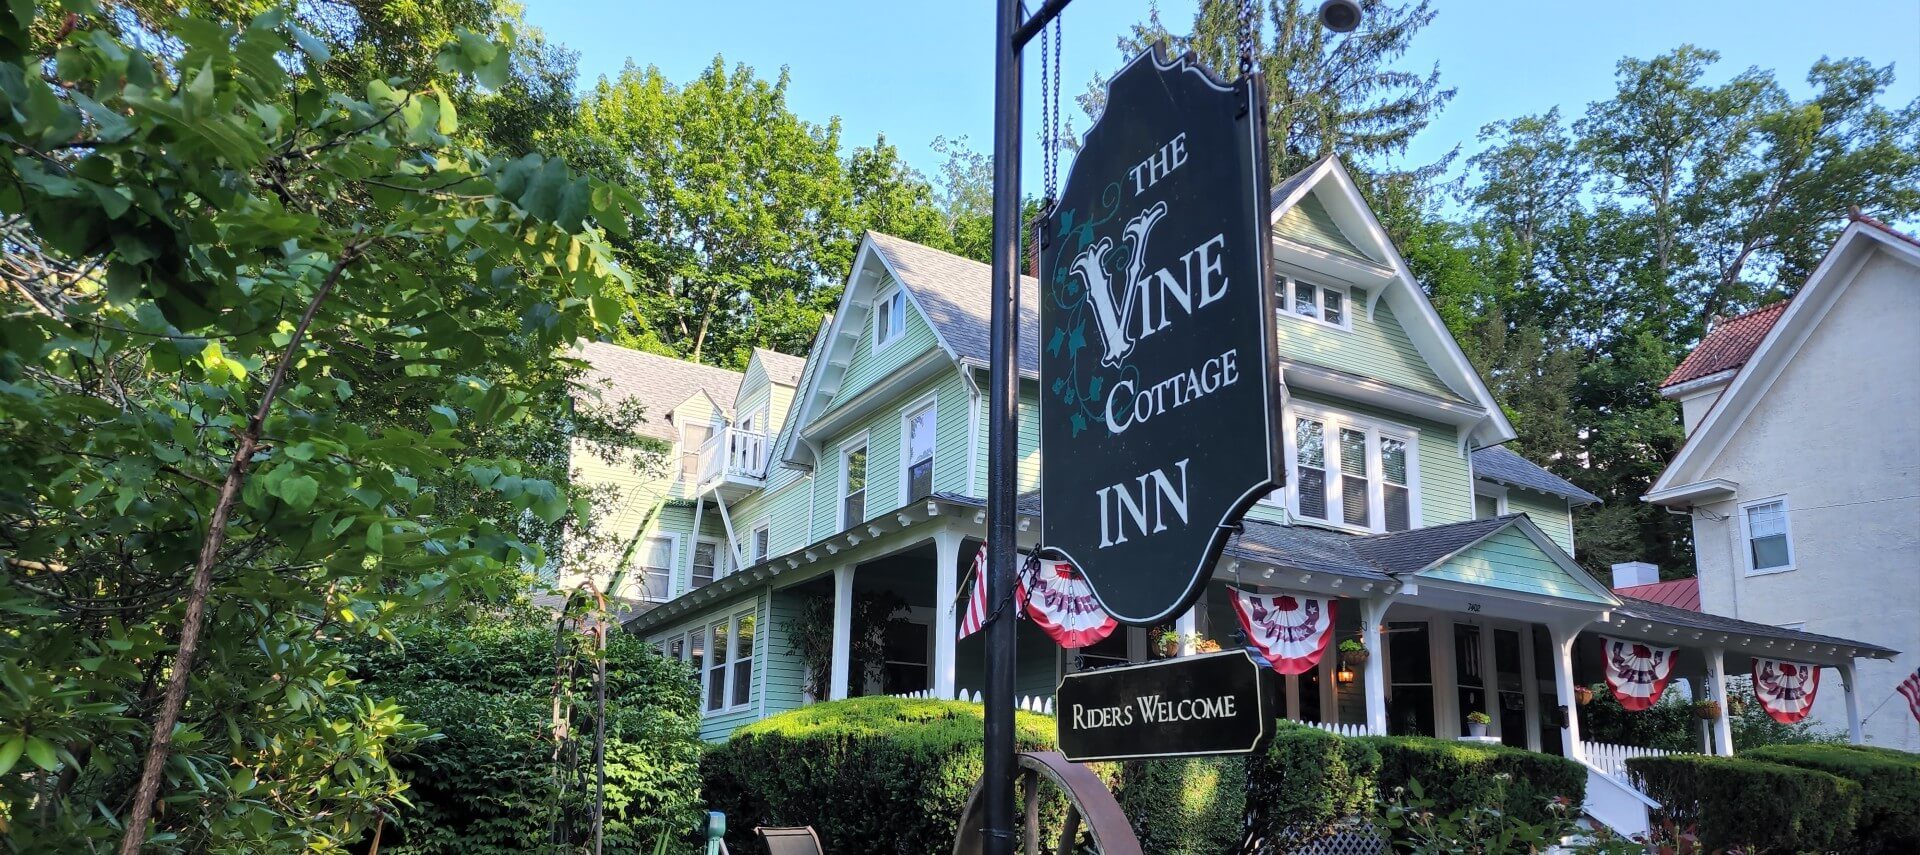 Business sign for Vine Cottage Inn hanging outside the inn surrounded by tall trees